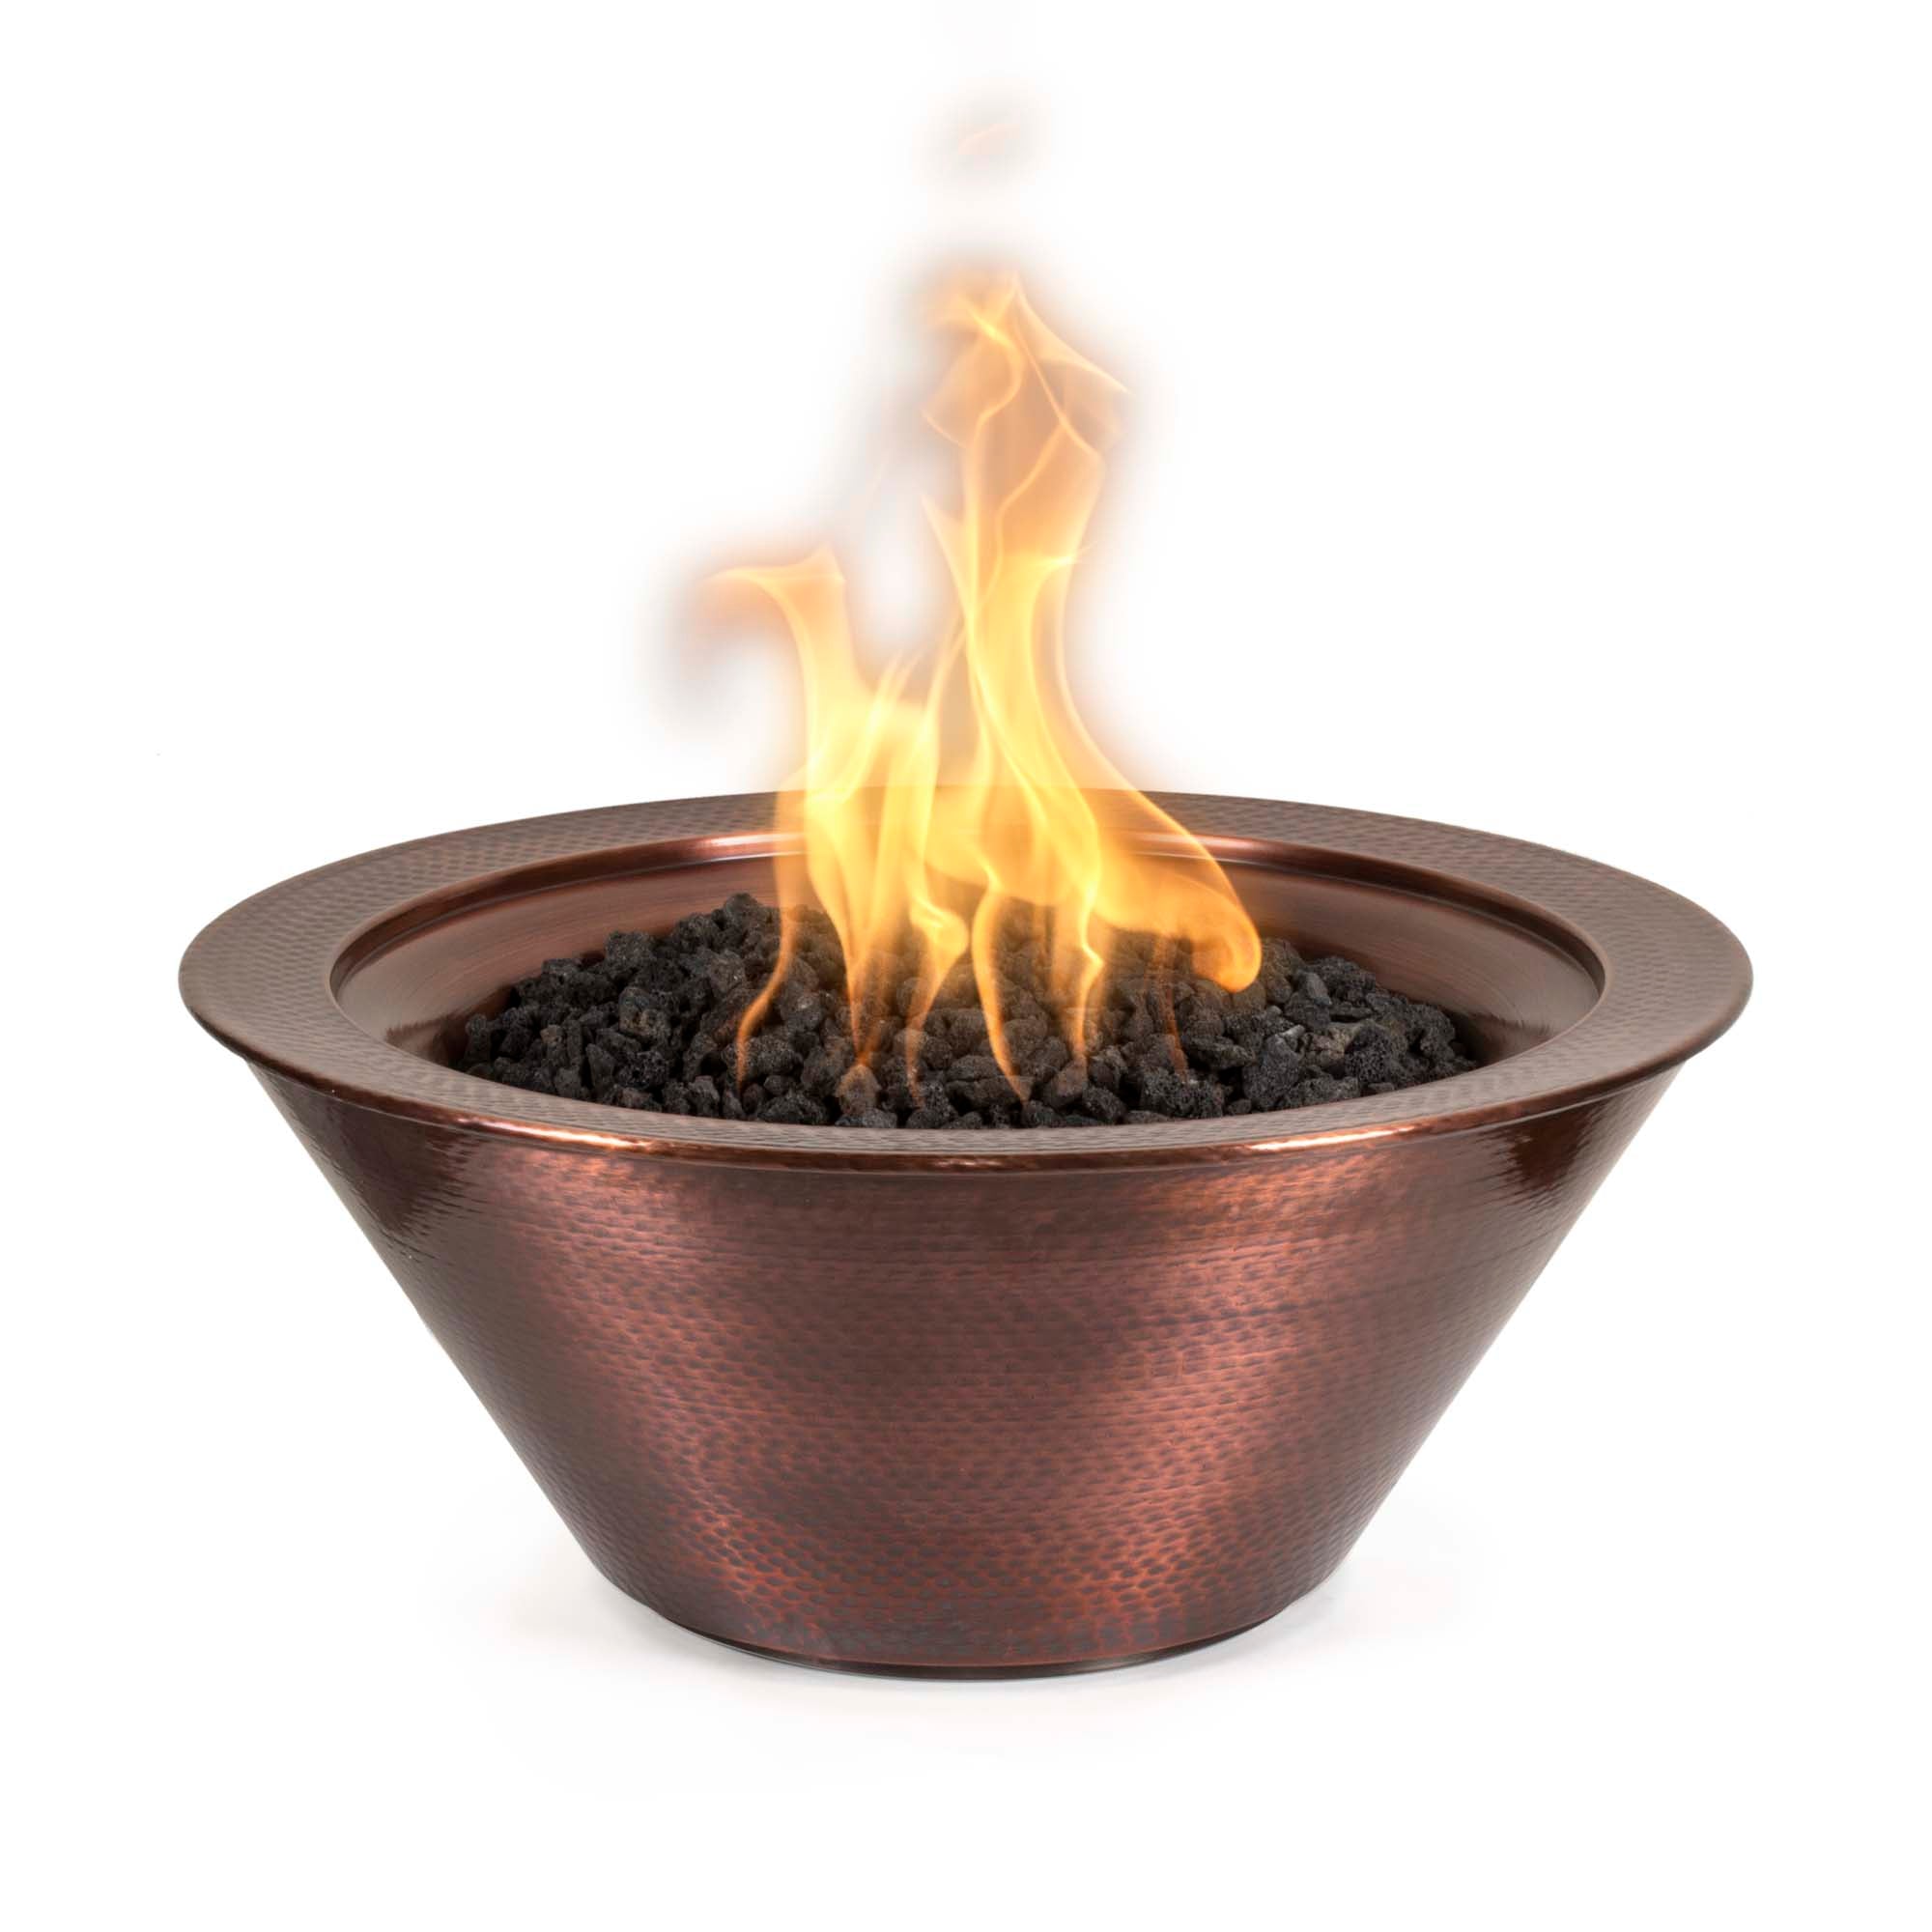 The Outdoor Plus Cazo Hammered Copper Round Fire Bowl Lit